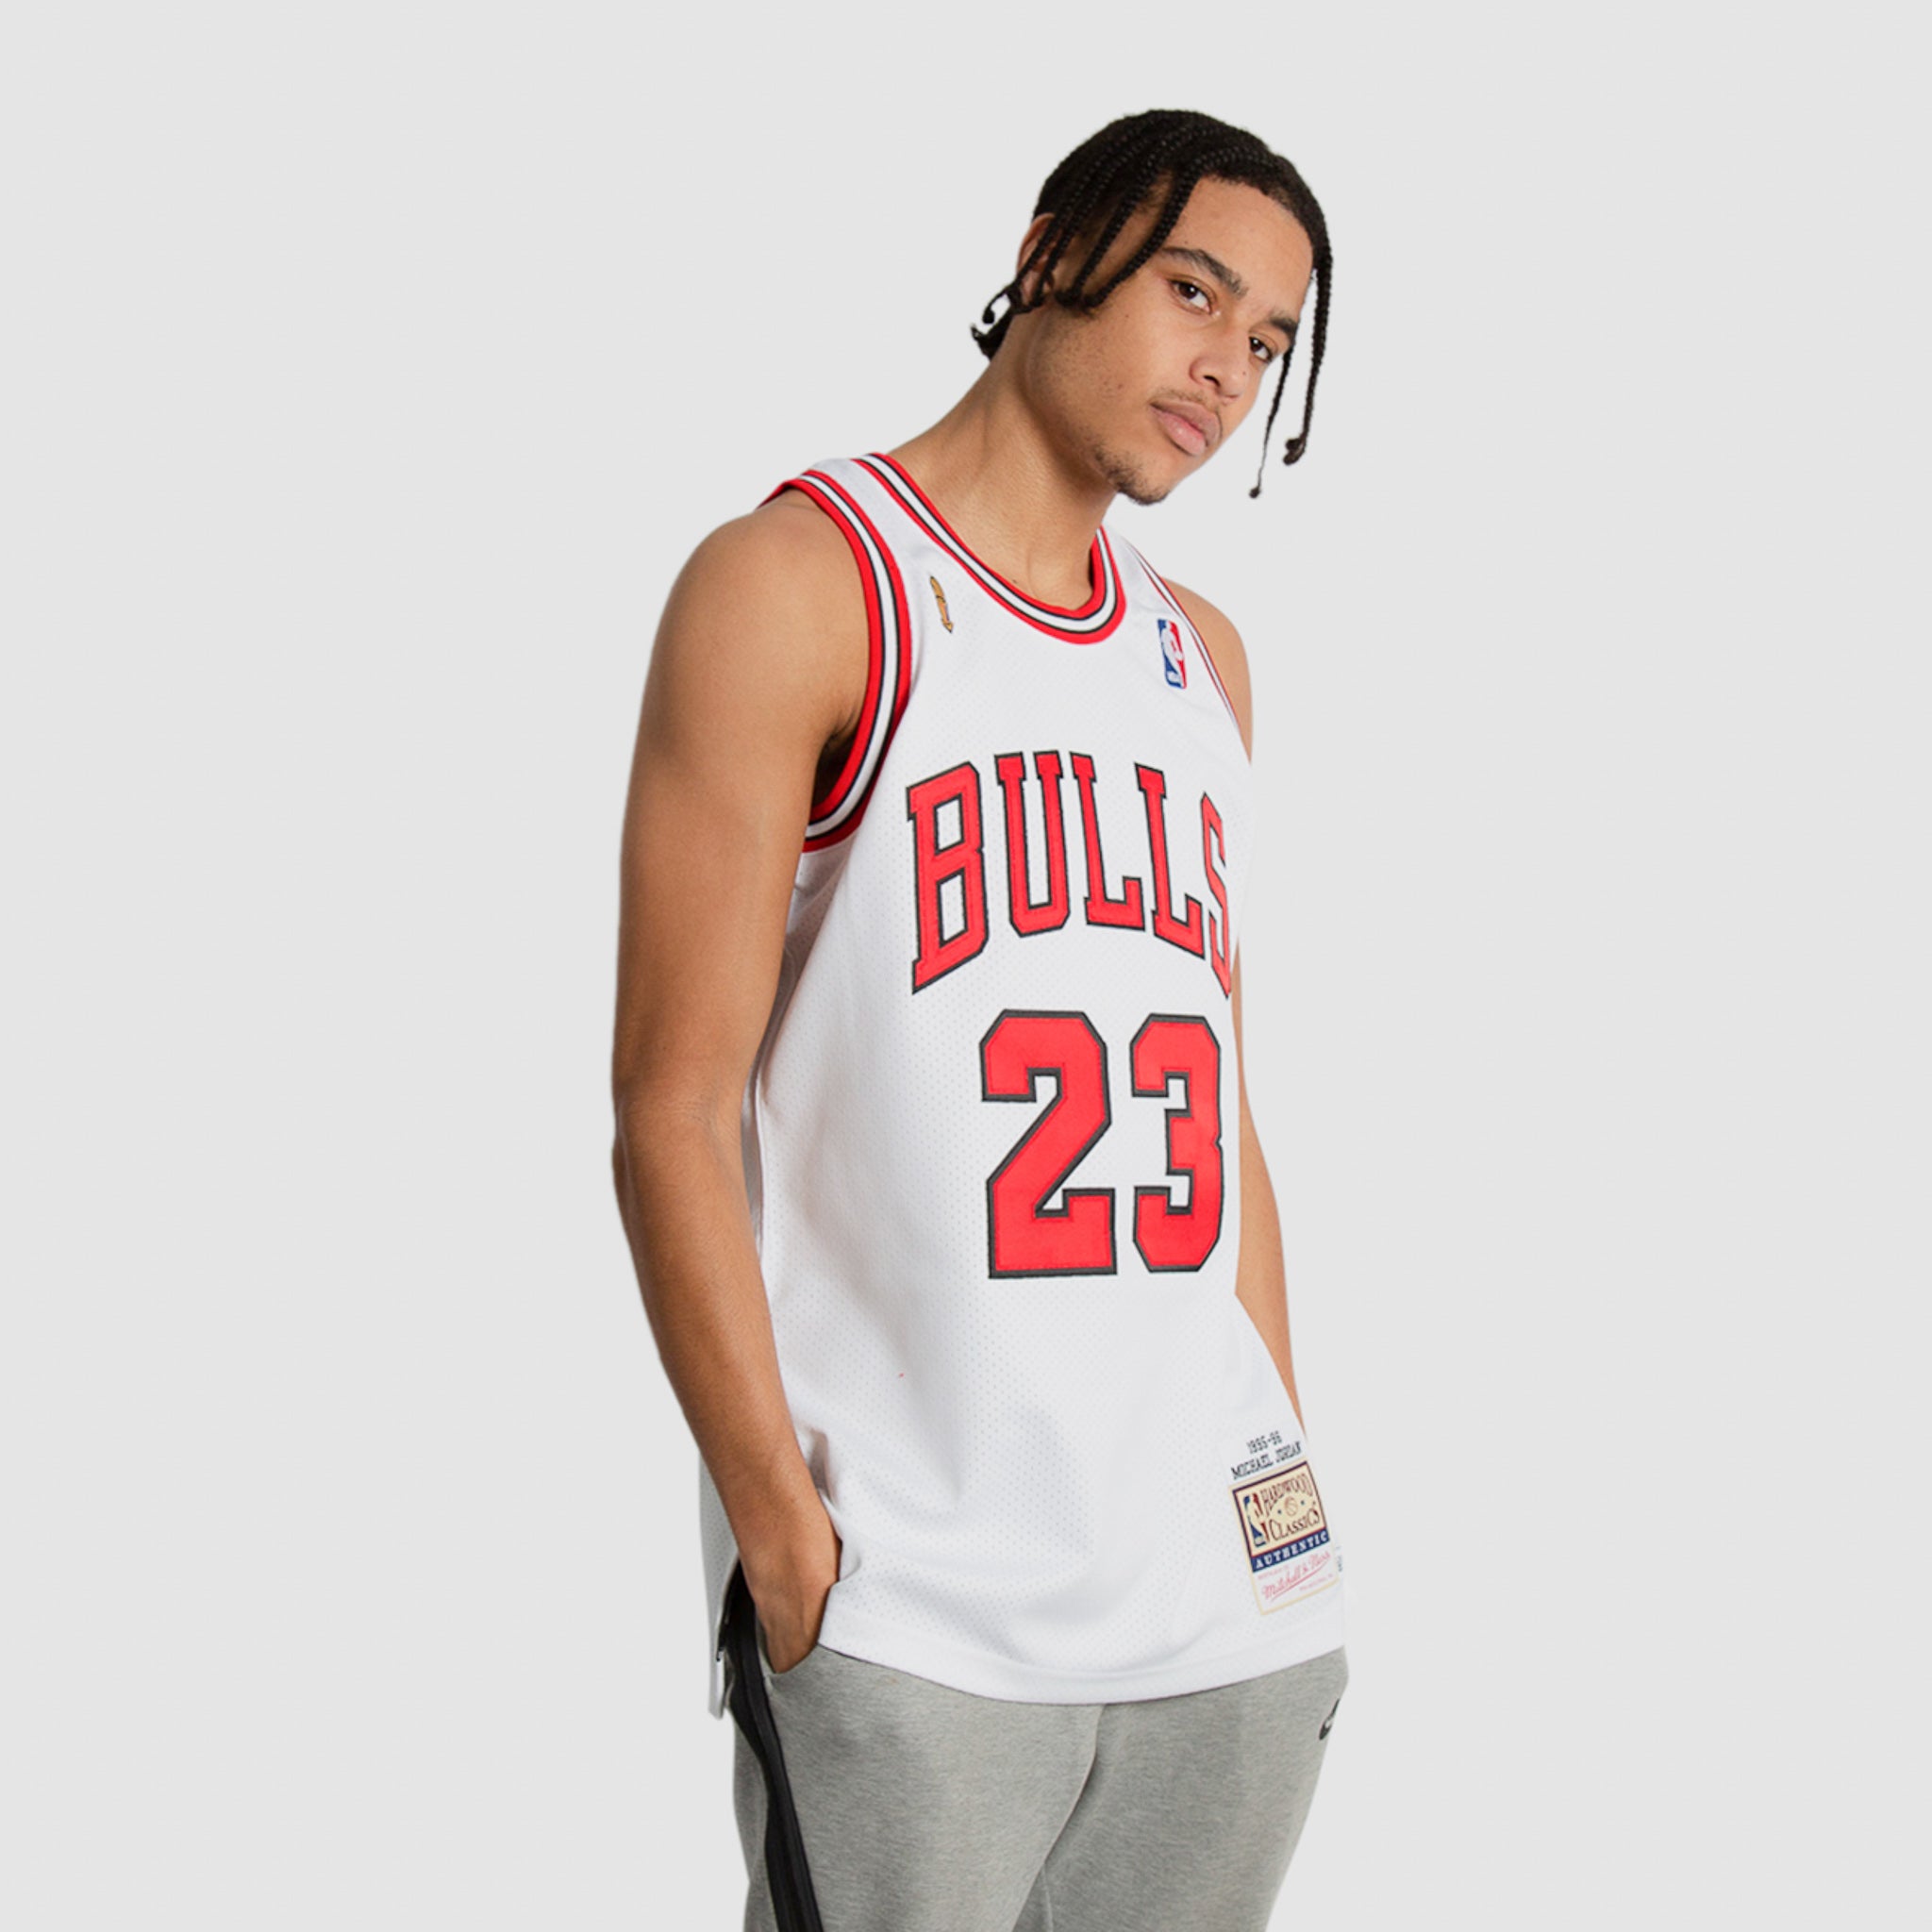 MITCHELL AND NESS Authentic Jersey Chicago Bulls 1995-96 Michael